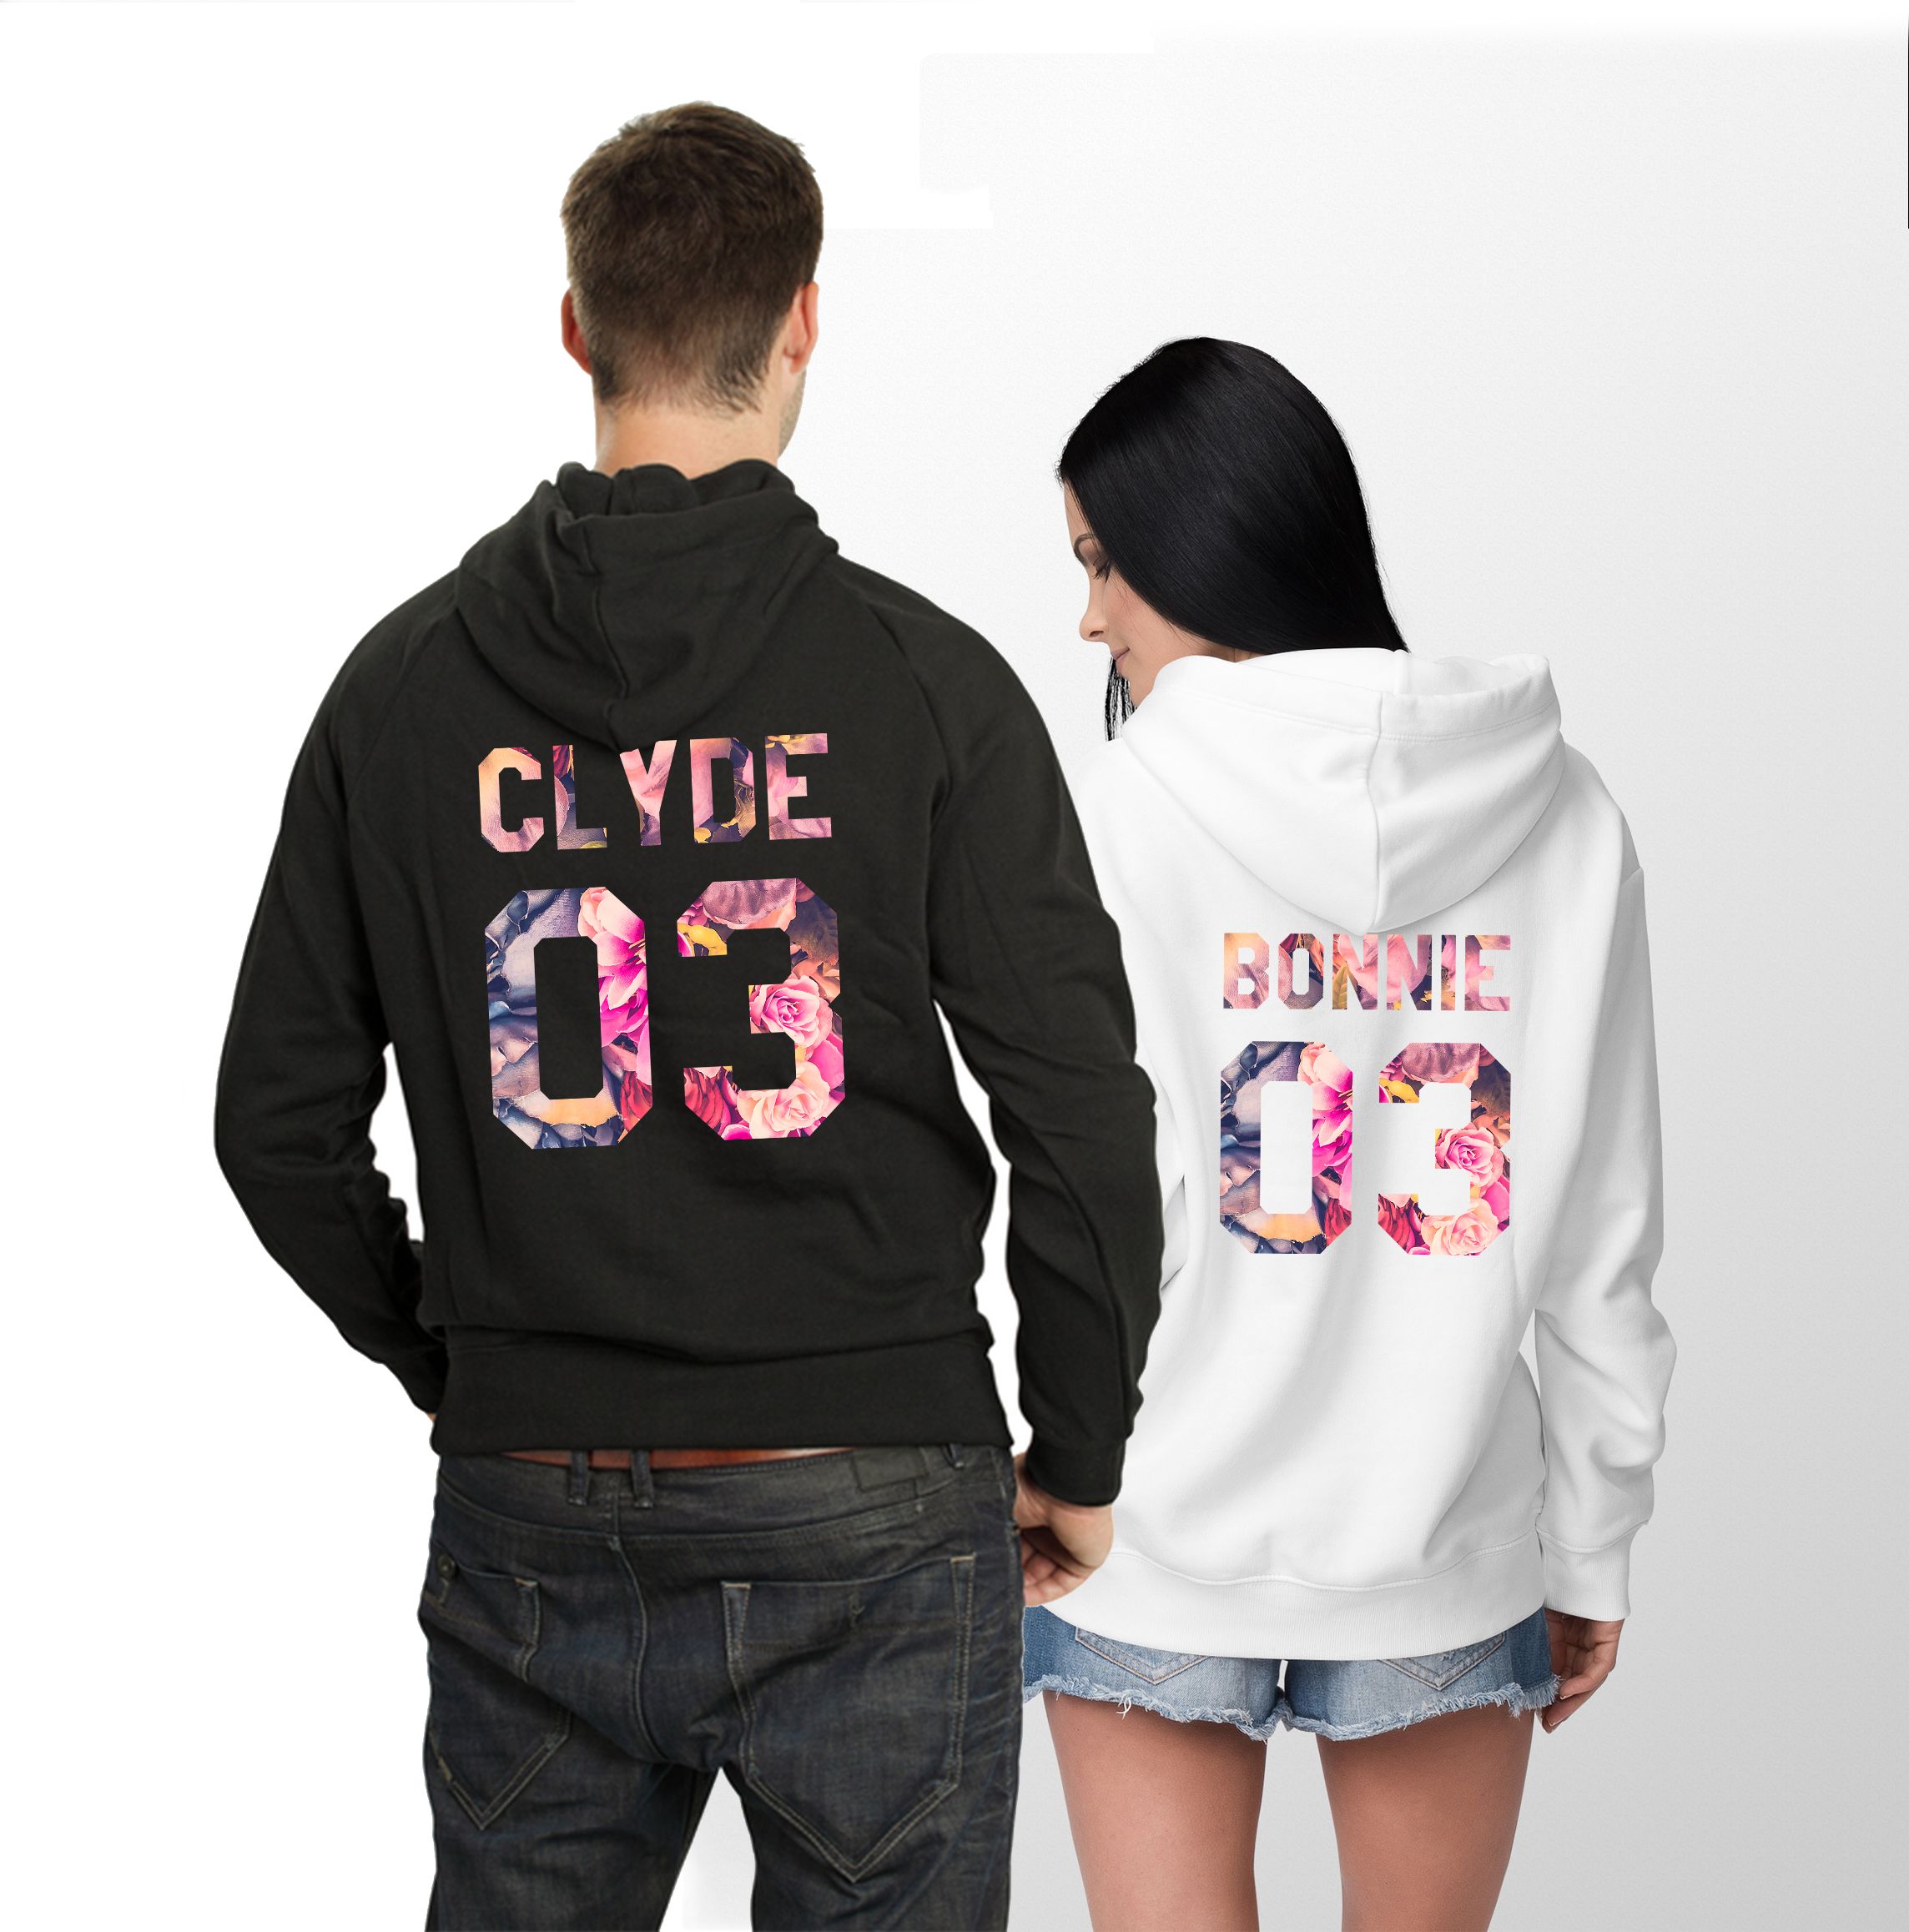 Tstars Bonnie & Clyde for Him & Her Matching Couples Hoodies